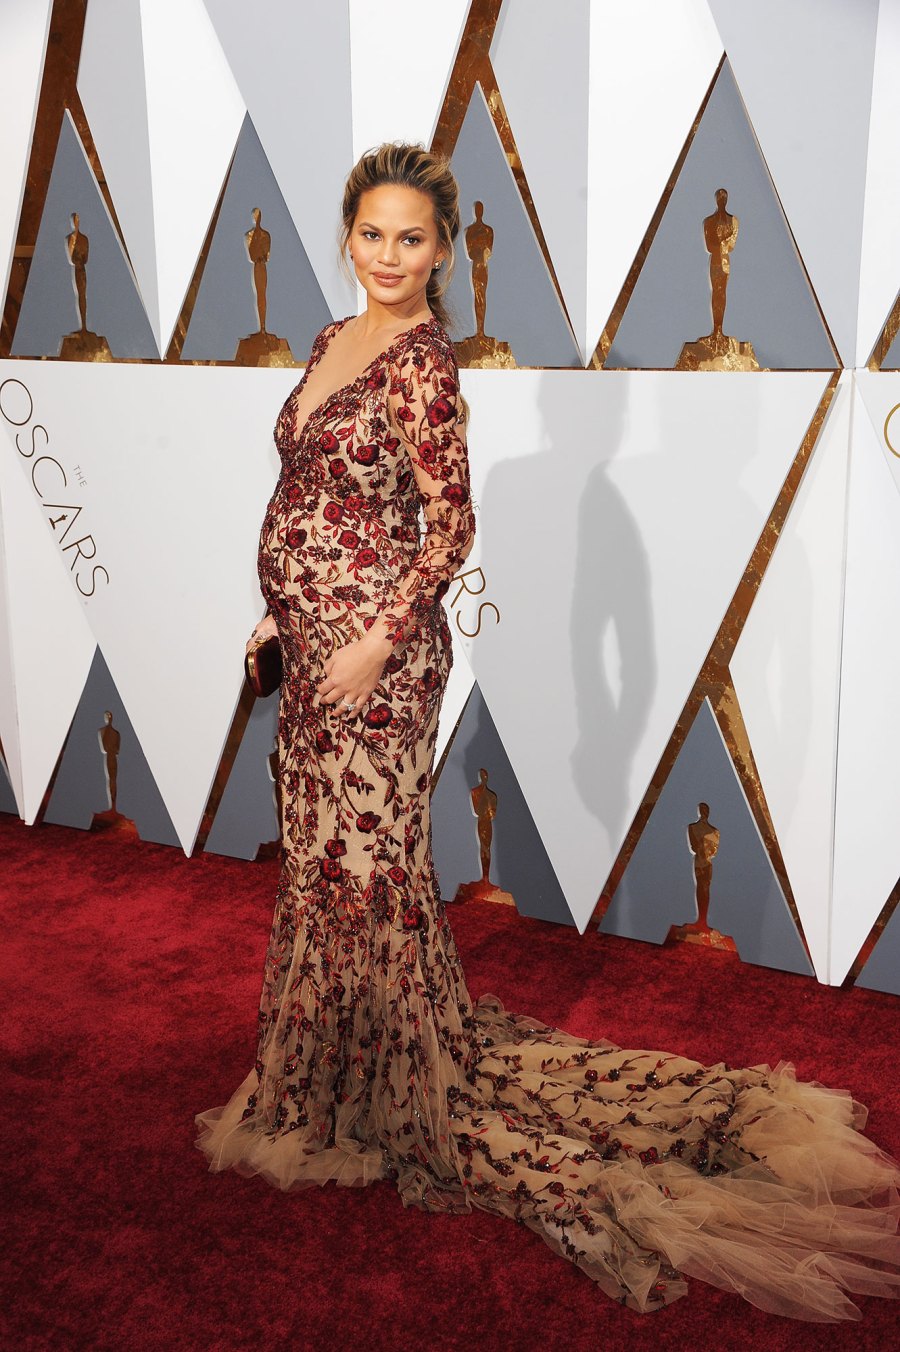 Pregnant Celebrities Show Off Baby Bumps on the Oscars Red Carpet